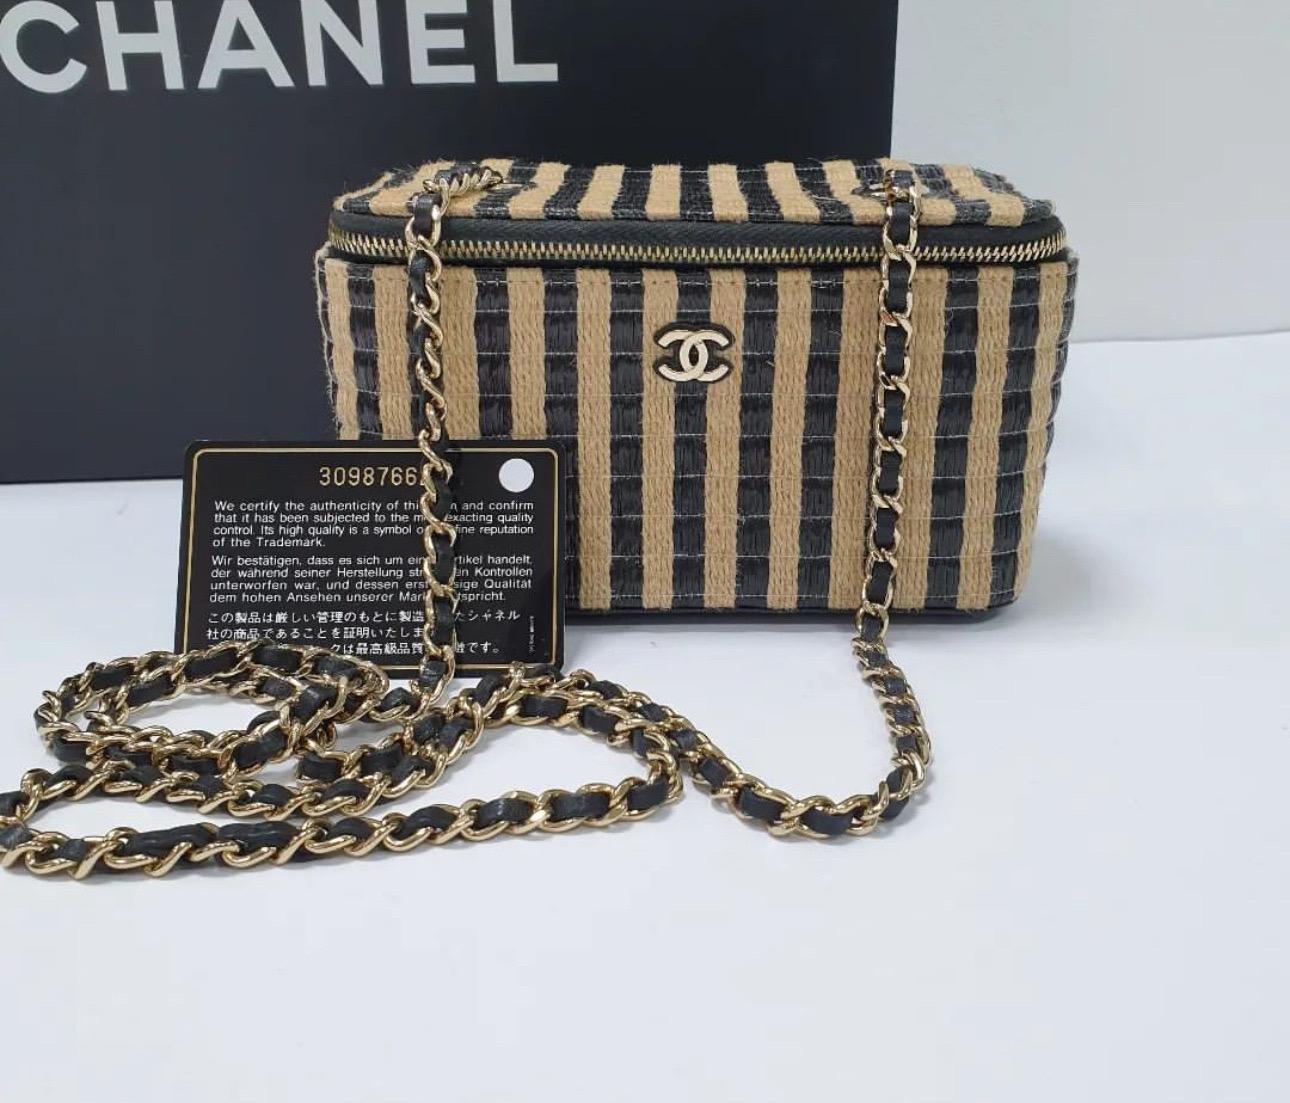 Material : Jute Straw
Colour : Beige Black
Includes : Dustbag, Card, 
Serial Number/ Date Code (Year) : 30xxxxxx (2021)
Measurements [ L x H x W ] : 16cm x 10cm x 8cm
Very good condition